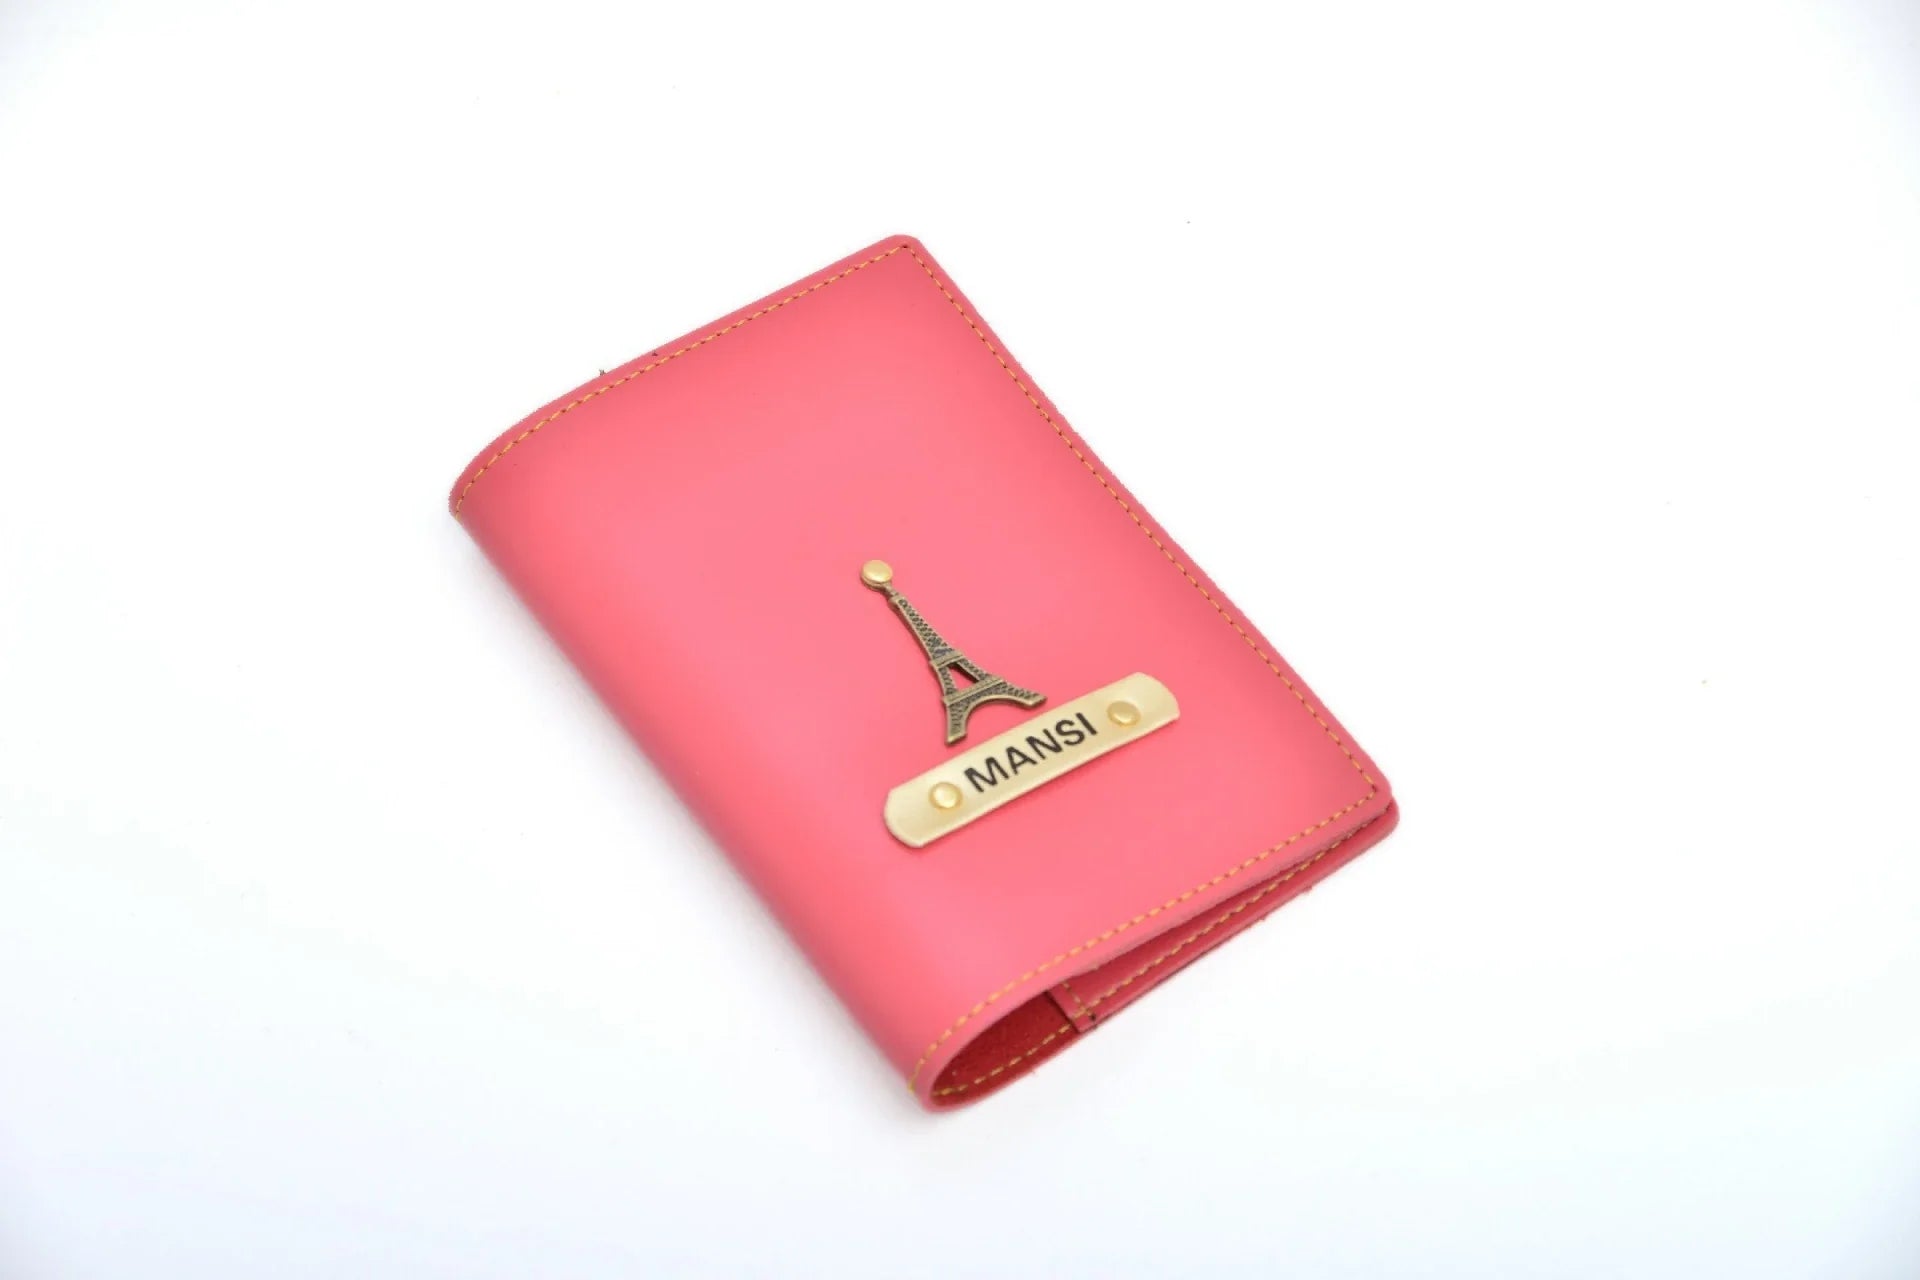 couple-twinning-passport-combo-2-pcs-customized-best-gift-for-boyfriend-girlfriend.Make the most awesome personalized passport covers yours, from the best personalized gifting store in India. With preium quality and umatched materials, a 100% customer satisfaction is always guaranteed just at Your Gift Studio.